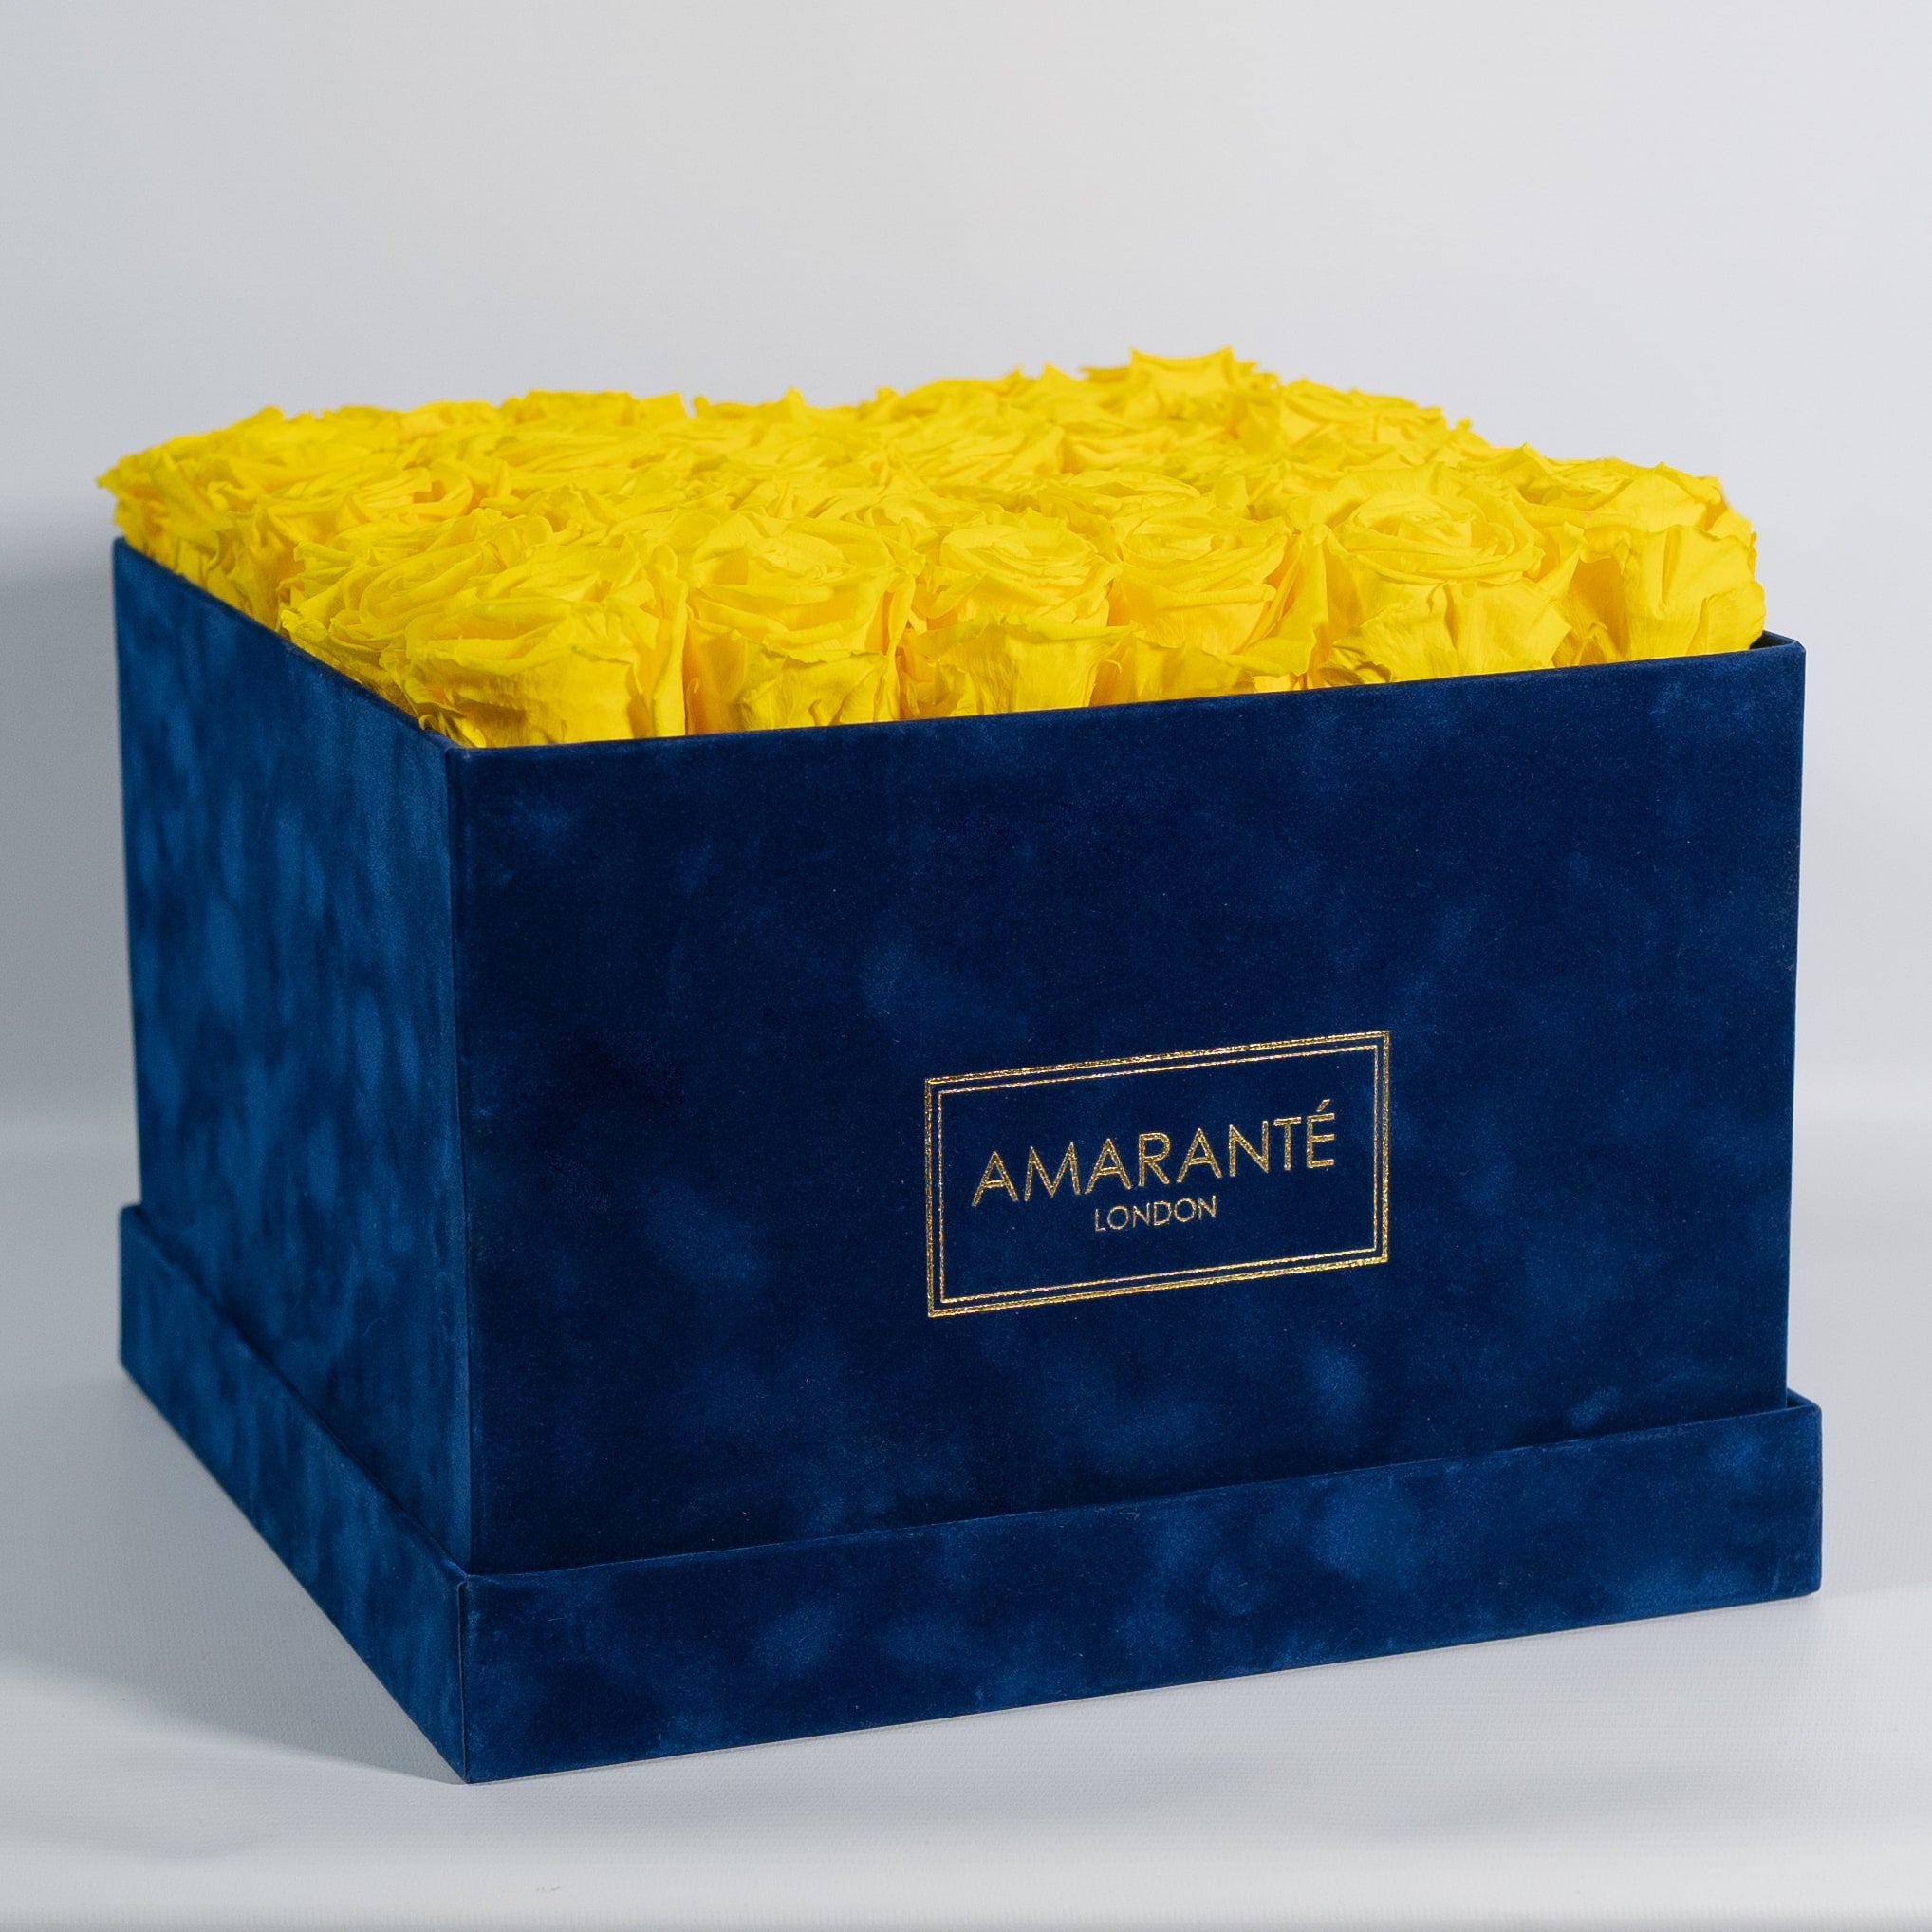 Delightful Yellow Roses in a fashionable blue package.